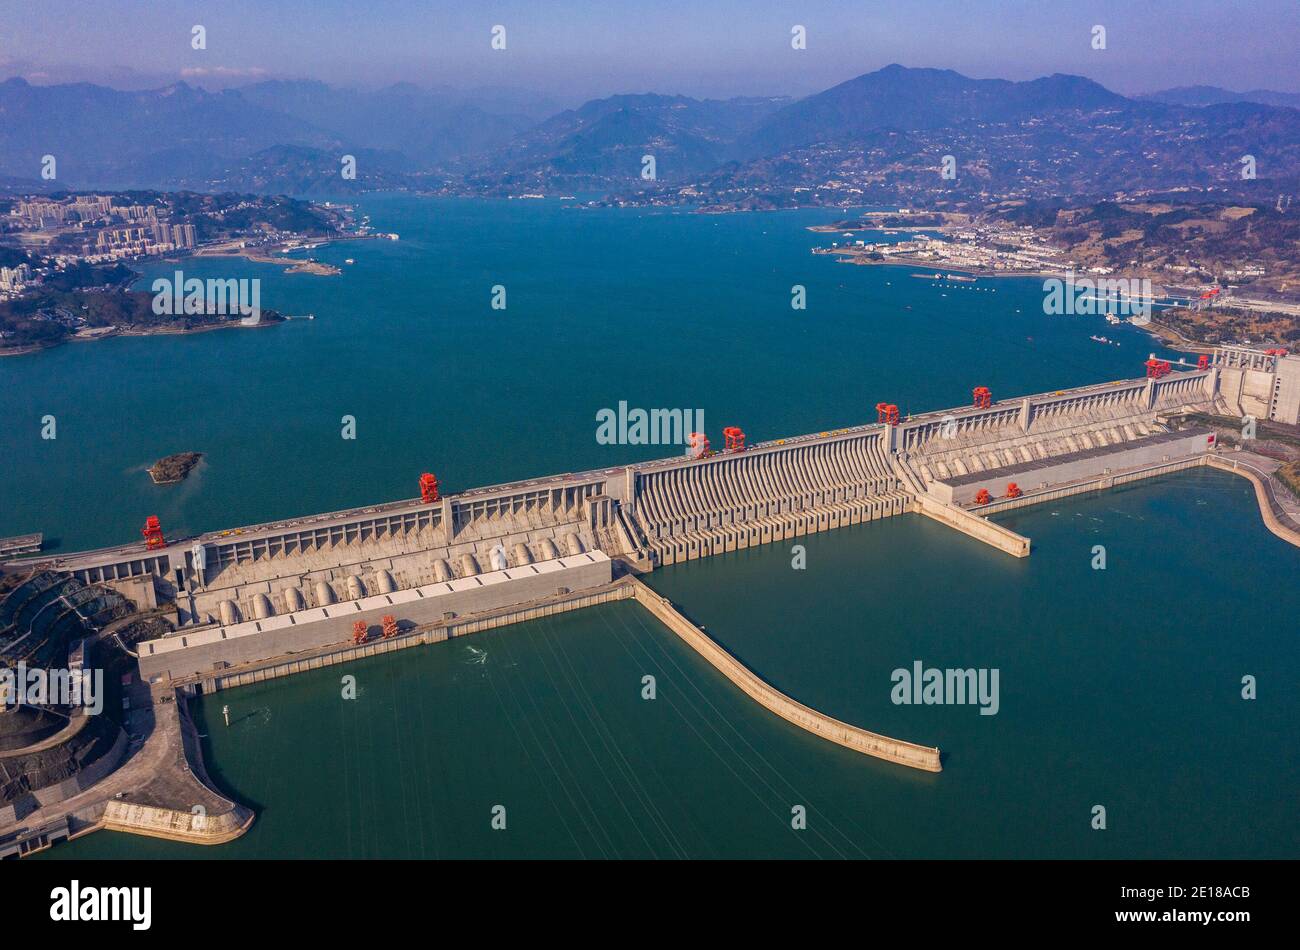 Beijing, China. 1st Jan, 2021. Aerial photo taken on Jan. 1, 2021 shows the Three Gorges Dam in central China's Hubei Province. The Three Gorges Hydroelectric Power Station on China's Yangtze River has generated 111.8 billion kWh in 2020, a new world record. Credit: Xiang Hongmei/Xinhua/Alamy Live News Stock Photo